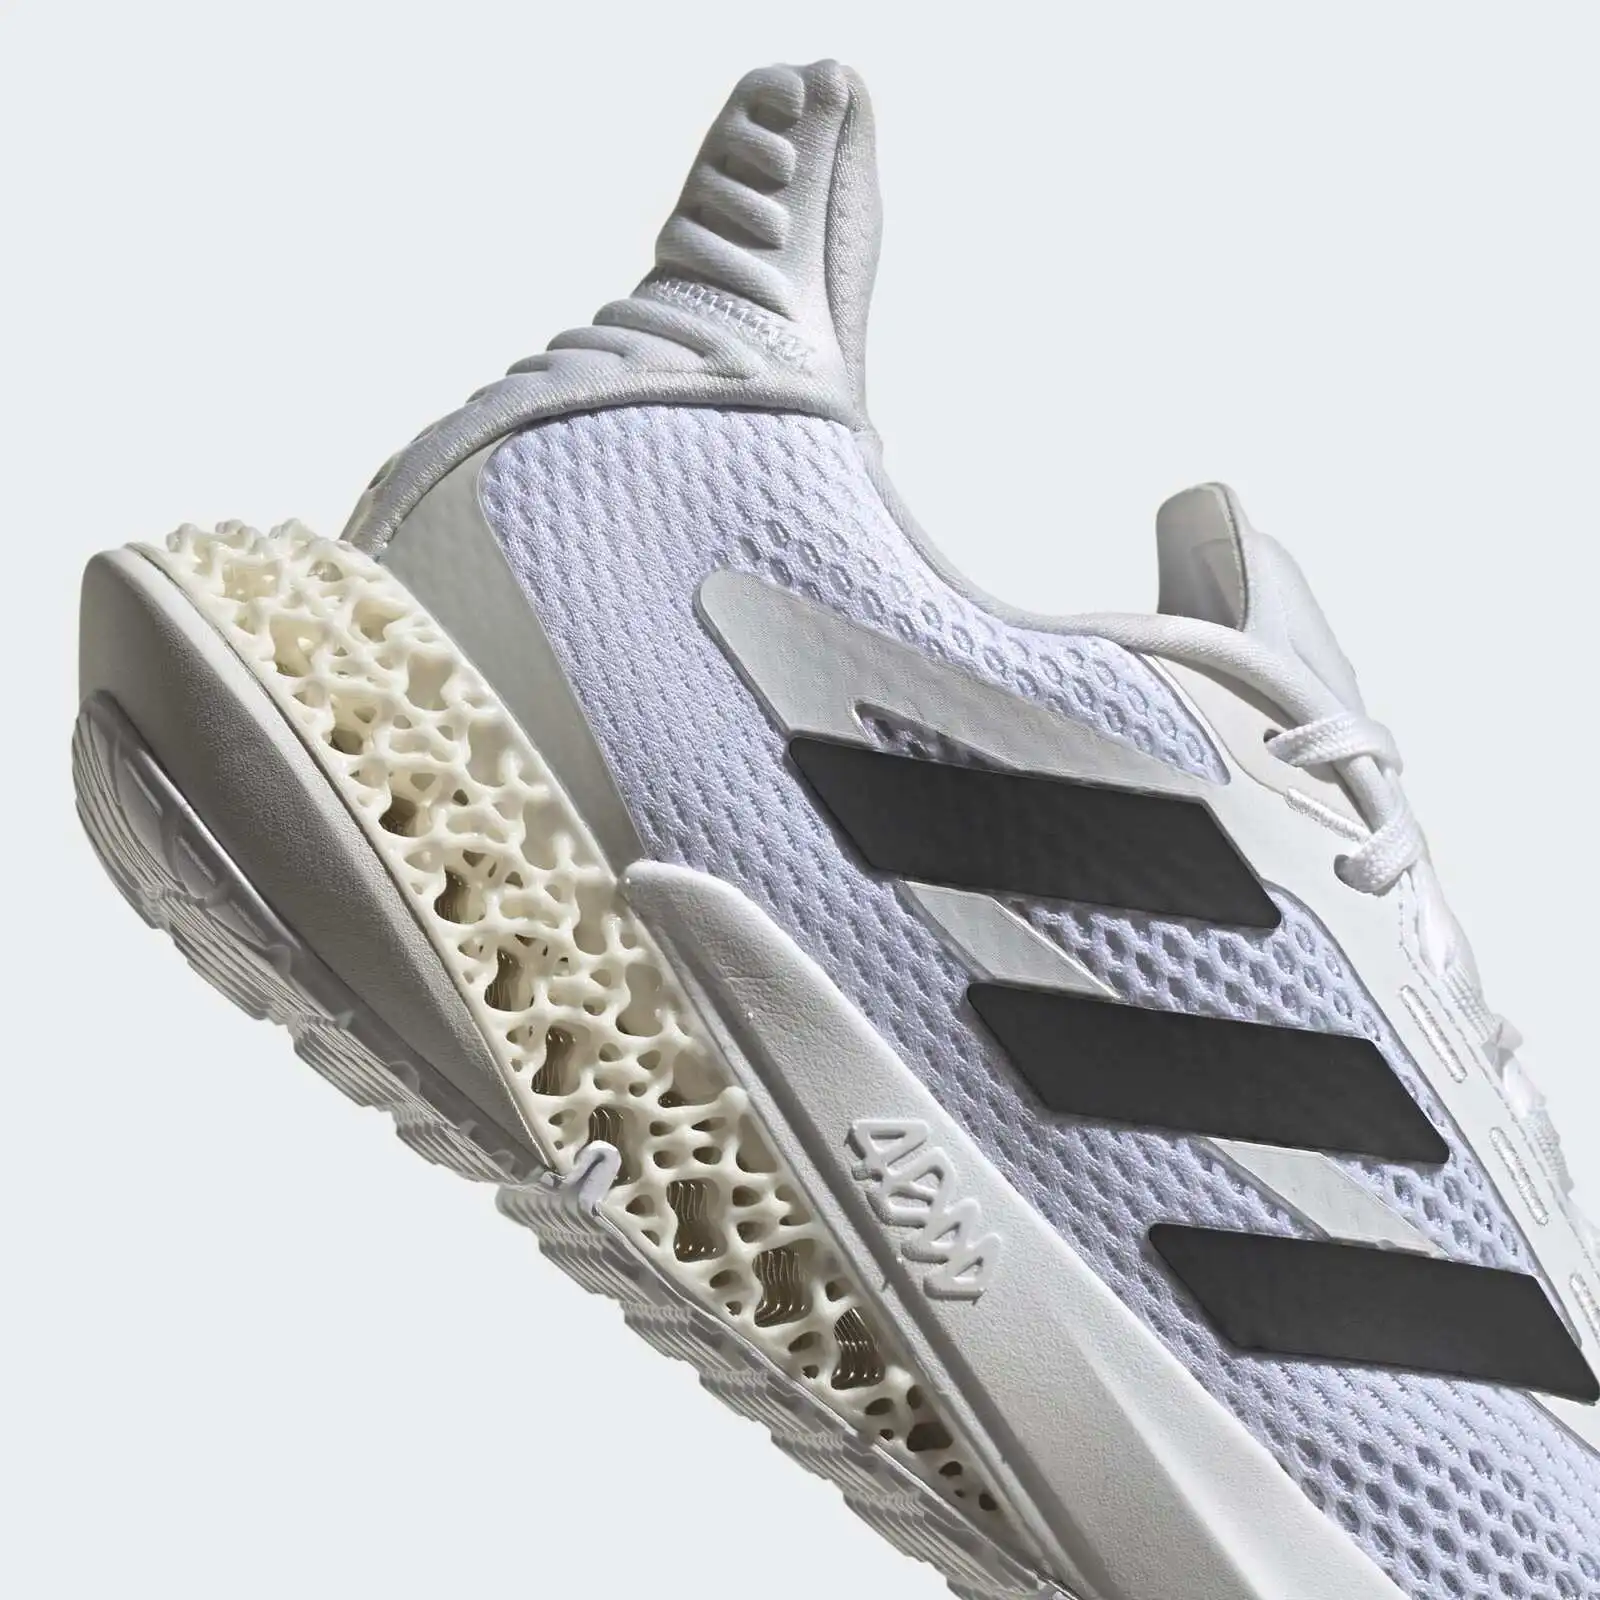 Adidas Men's 4DFWD Pulse Training Running Shoes Runners Sneakers - White